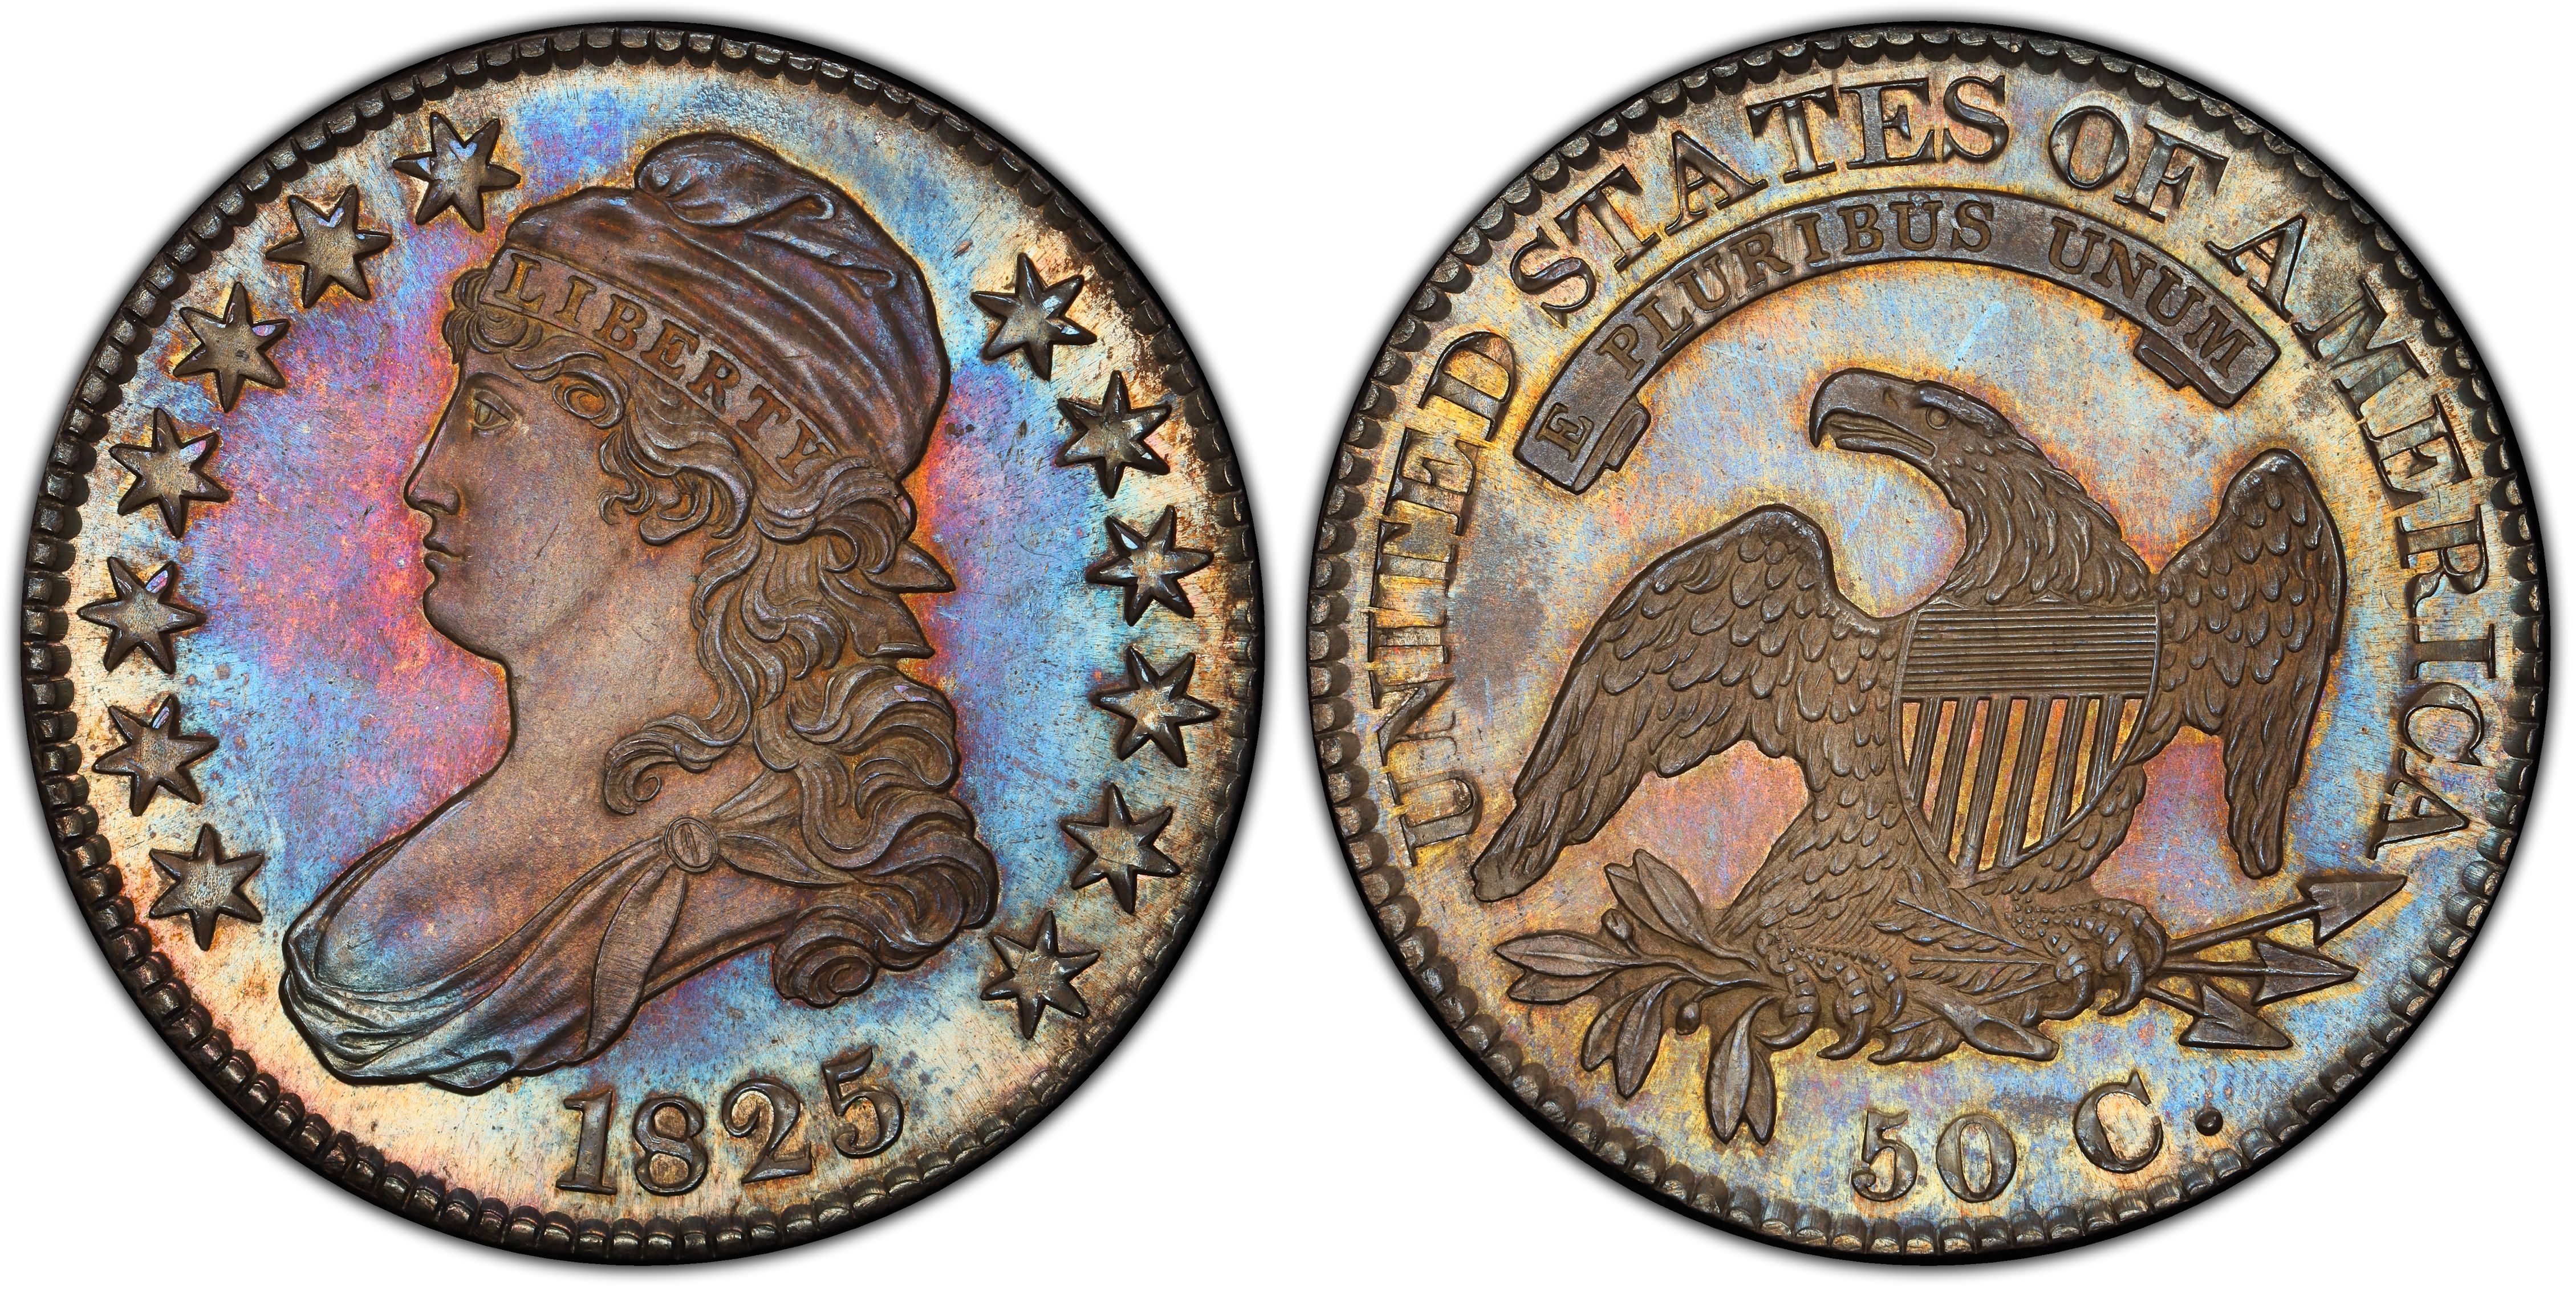 1825 50C (Proof) Capped Bust Half Dollar - PCGS CoinFacts